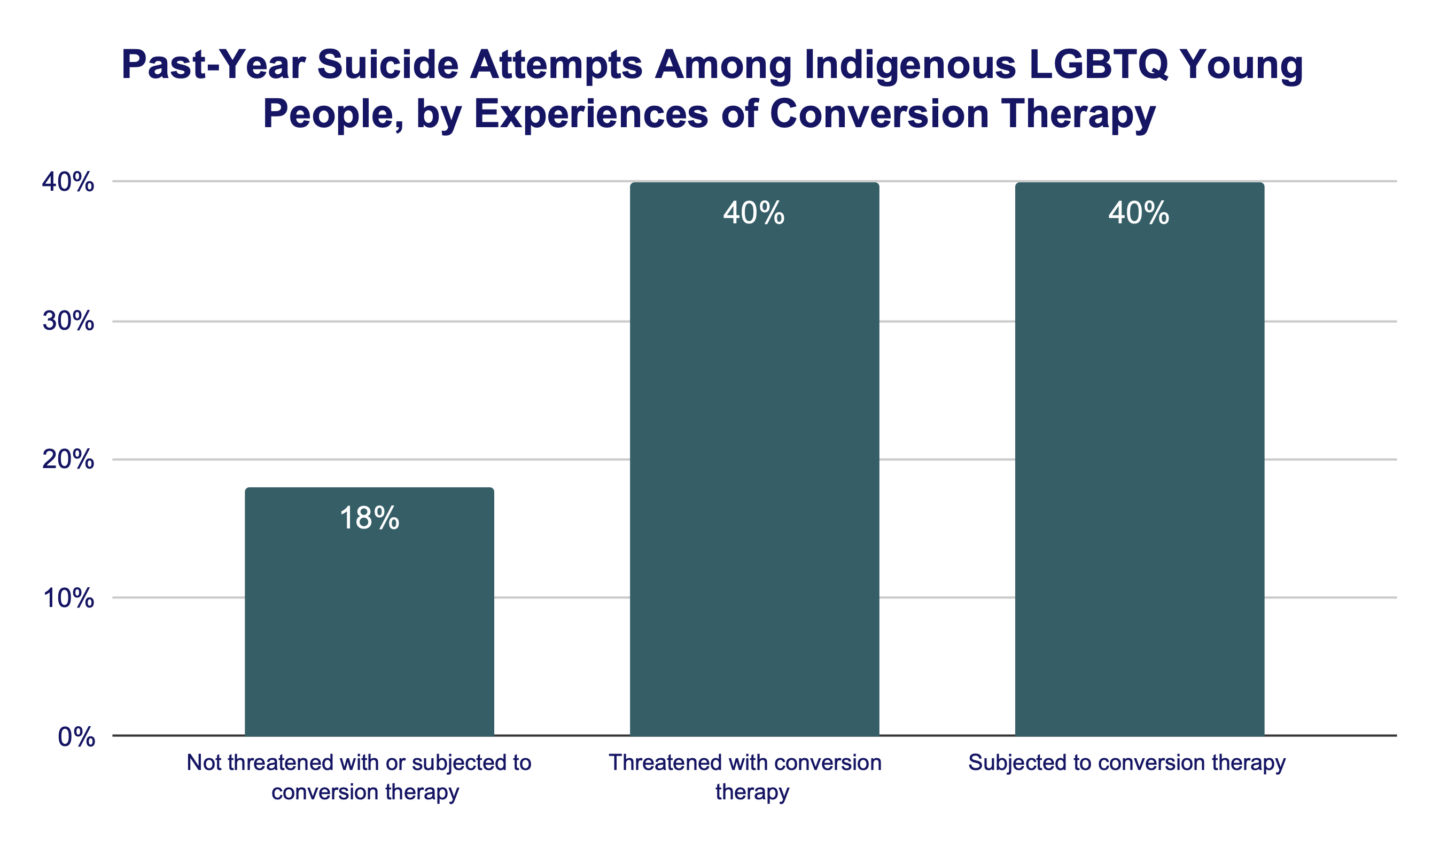 Past Year Suicide Attempts Among Indigenous LGBTQ Young People by Experiences of Conversion Therapy